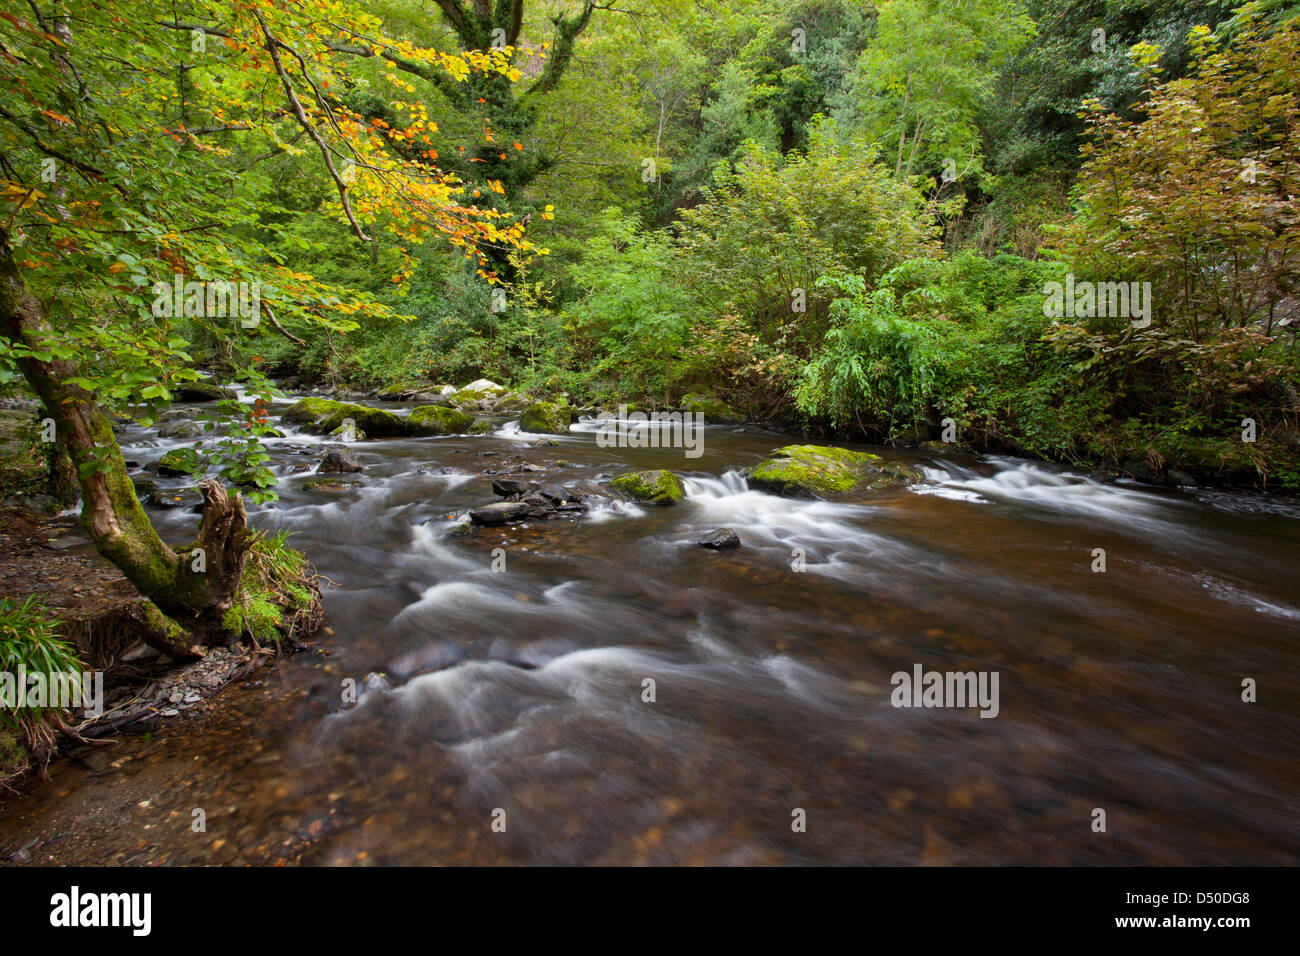 The River Vartry flowing through the Devil's Glen, County Wicklow, Ireland. Stock Photo